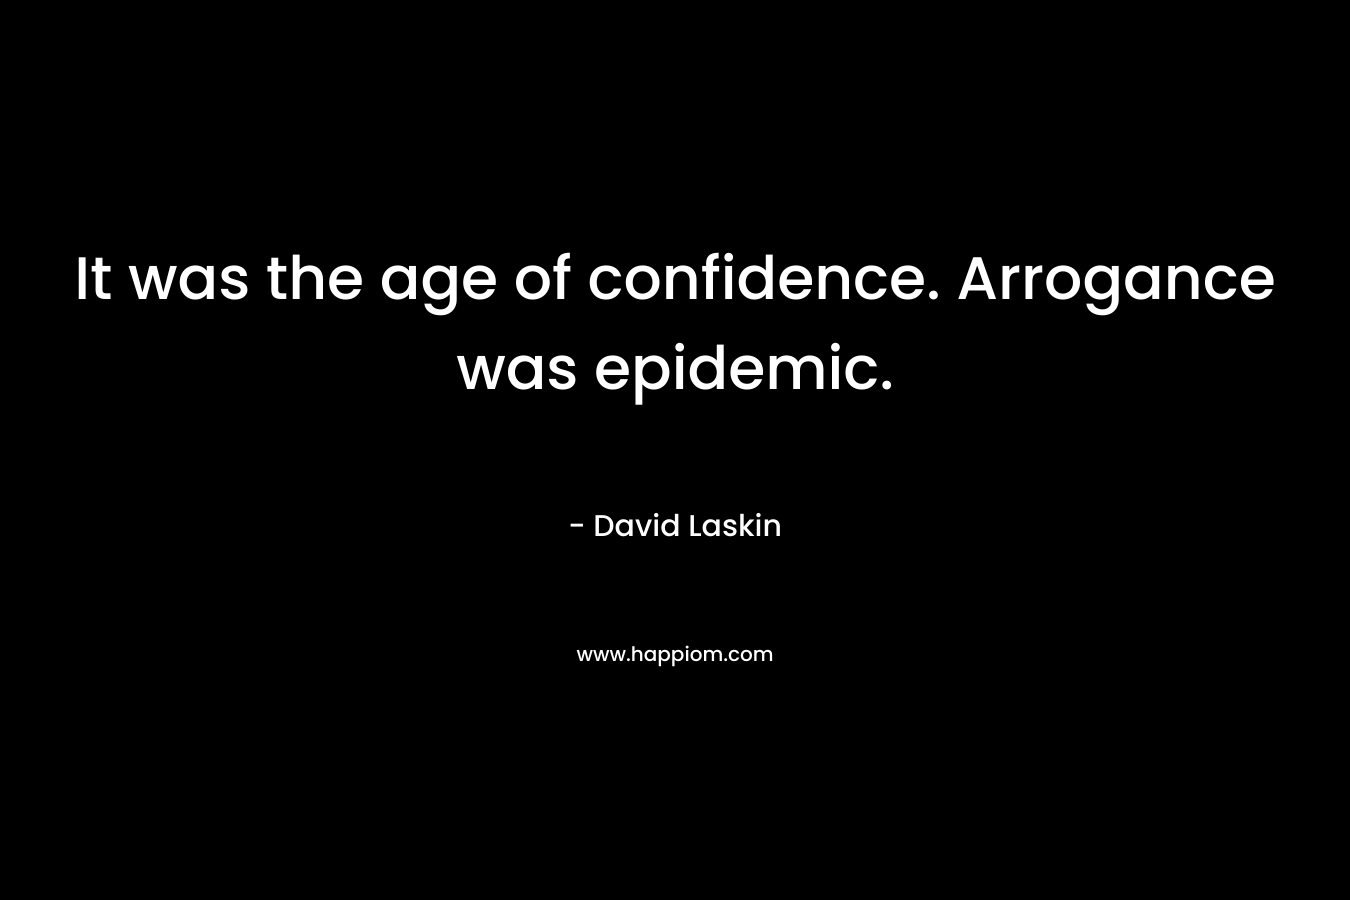 It was the age of confidence. Arrogance was epidemic.